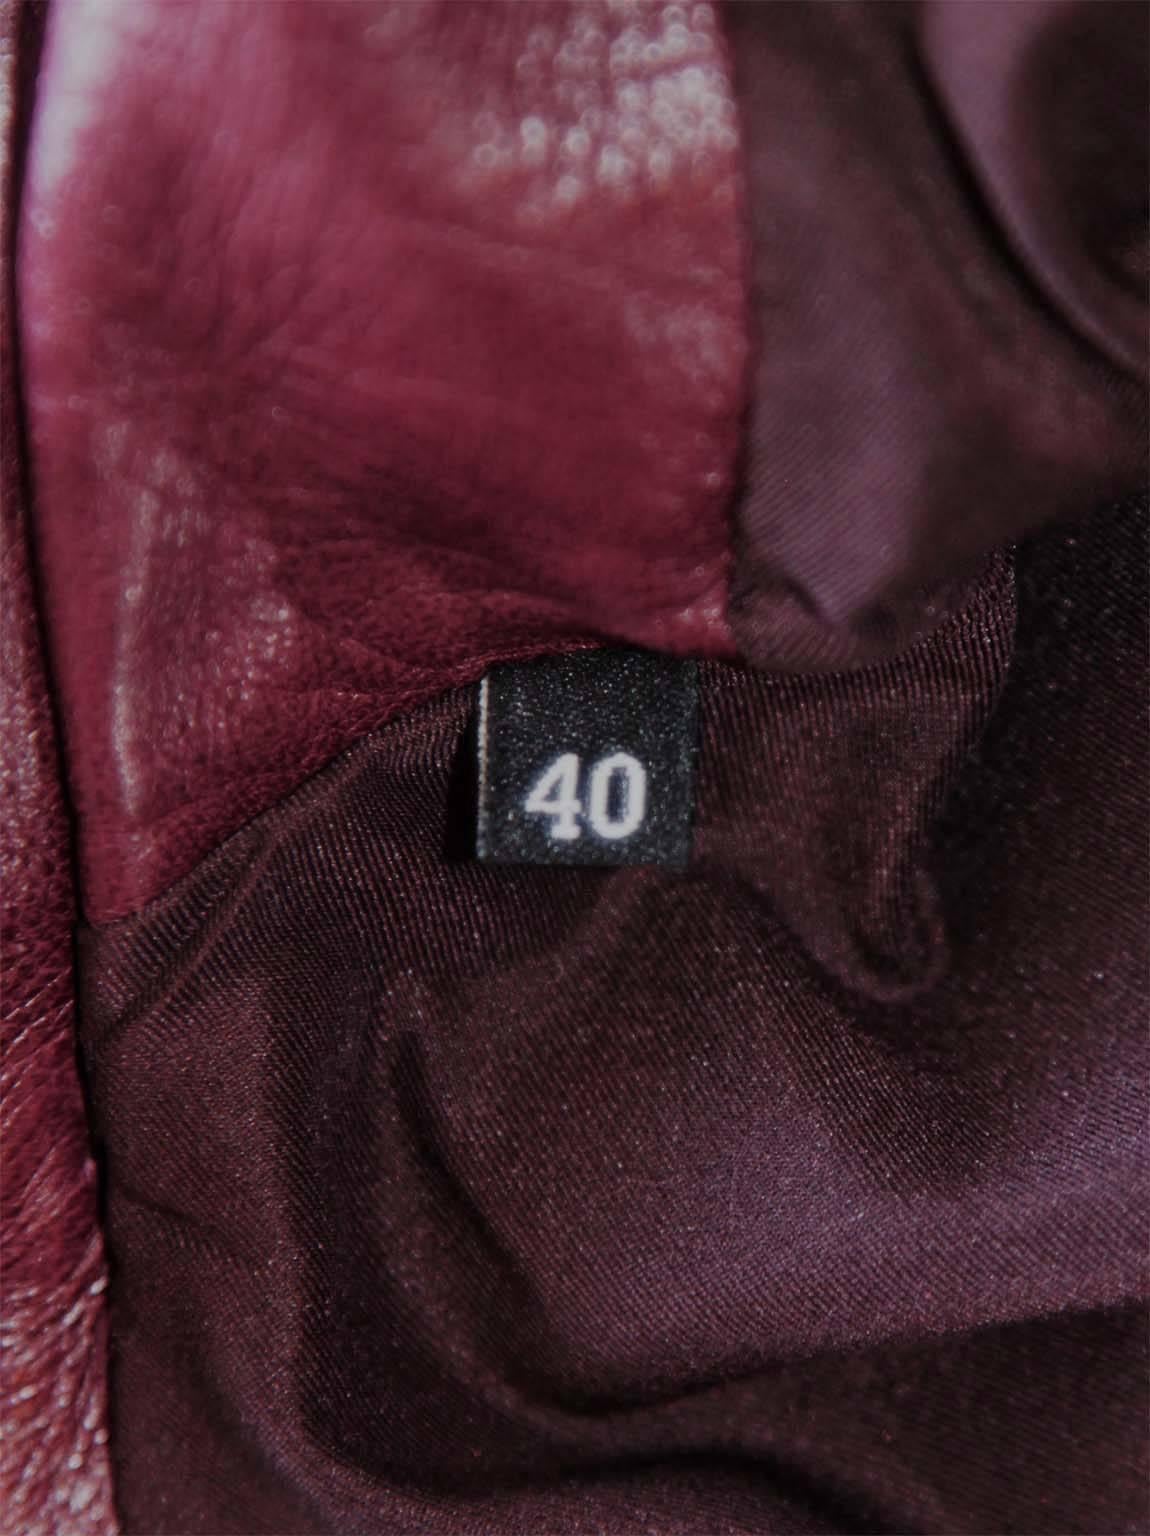  The Dreamiest Tom Ford Gucci FW 2003 Maroon Red Leather Corseted Moto Jacket! 4